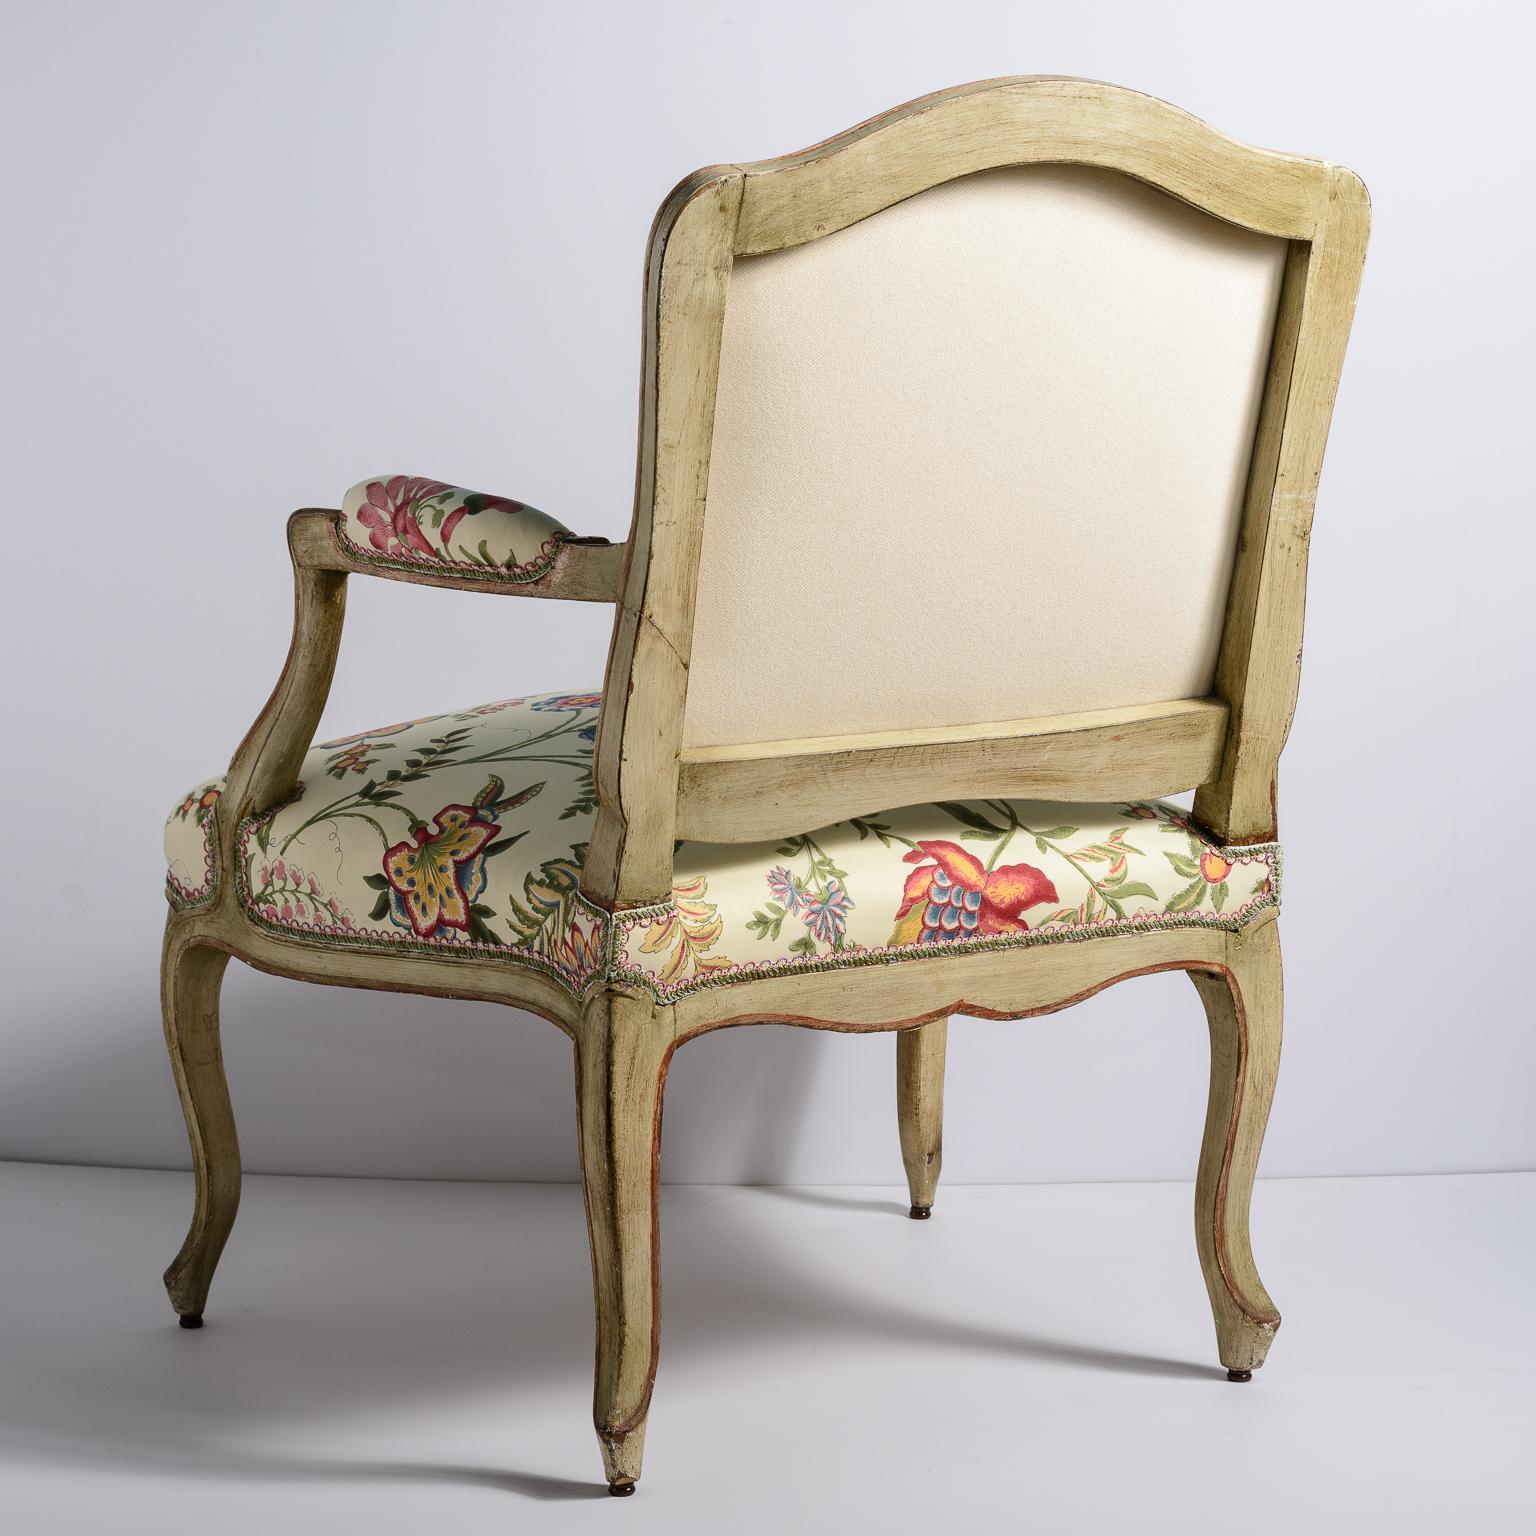 Pair of Period French Louis XV Painted Fauteuils,  18th C.
This pair has a cartouche-shaped padded back.
The arms are upholstered, the front and back have a  serpentine form and elegant cabriole legs.  These  type of chairs are characterized by its